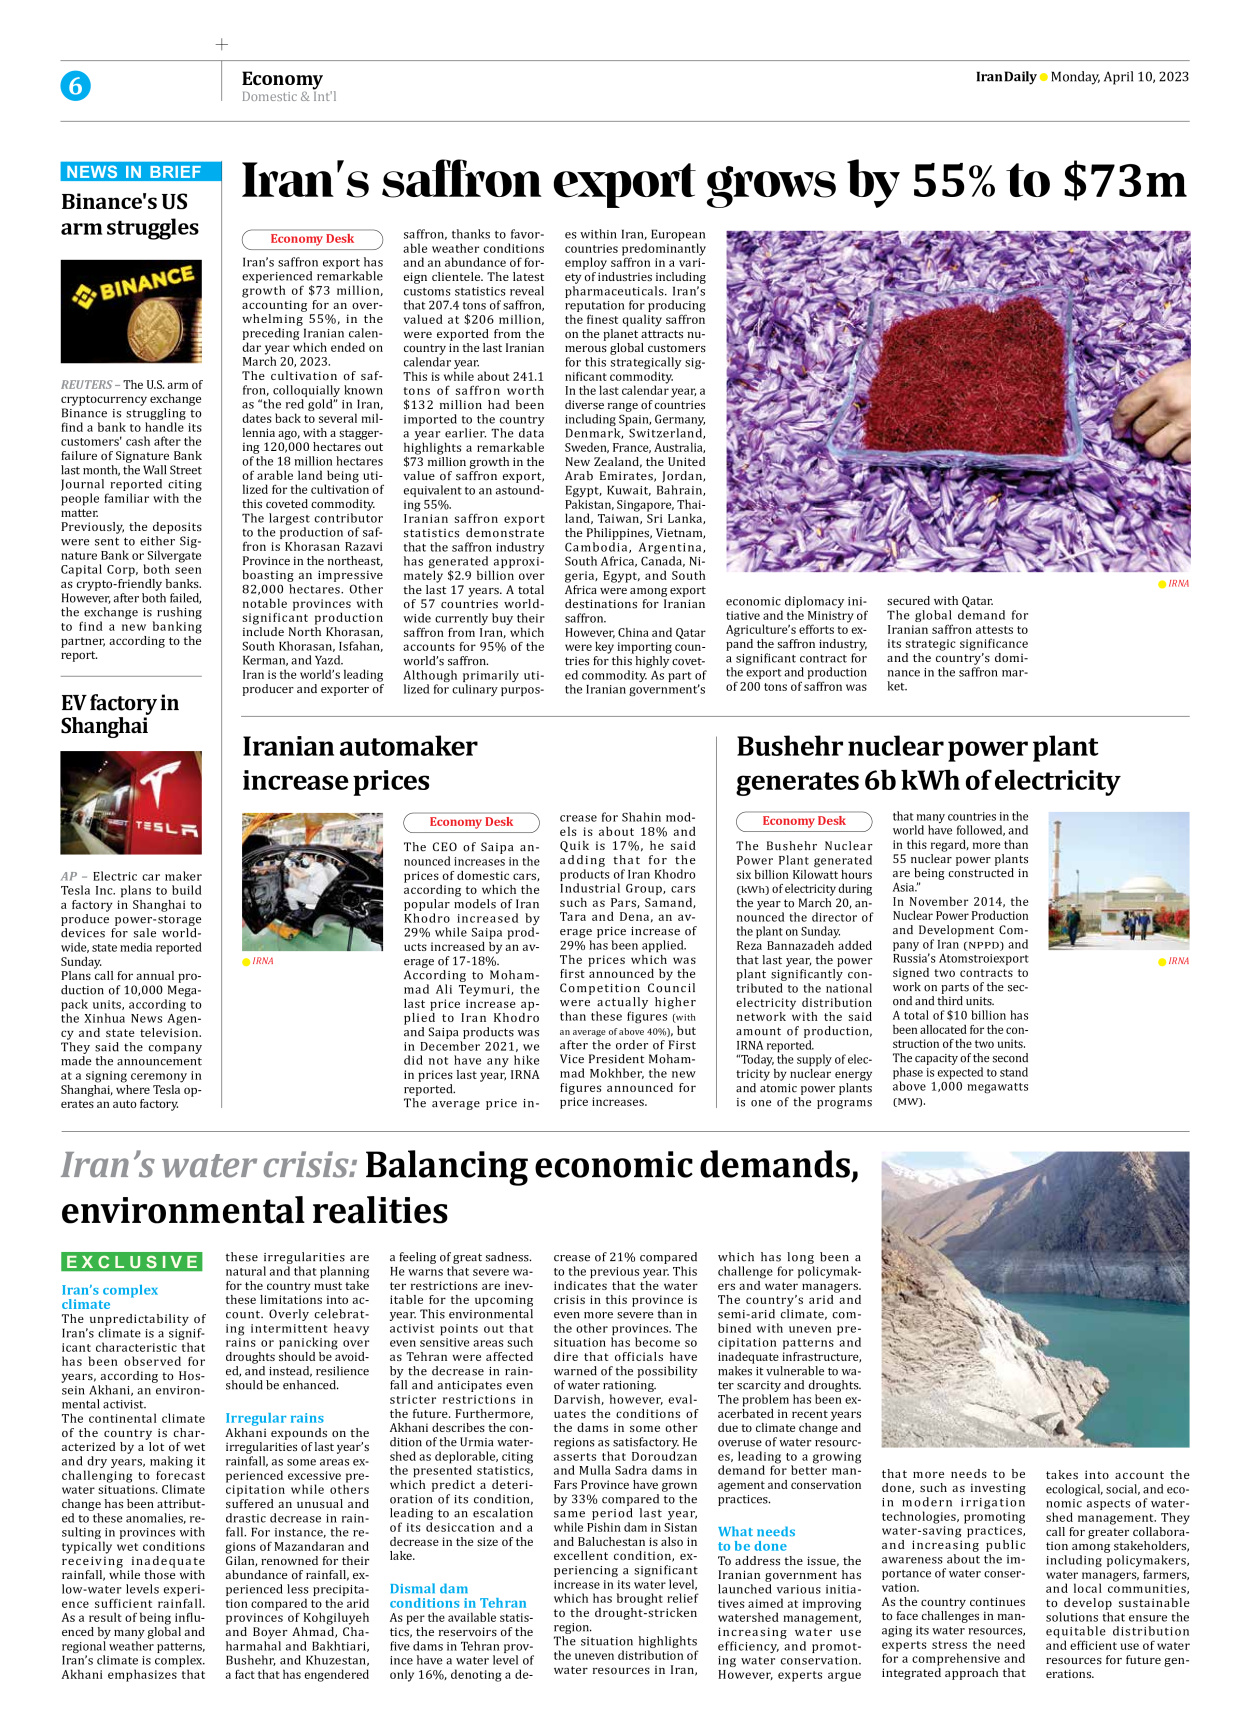 Iran Daily - Number Seven Thousand Two Hundred and Sixty Six - 10 April 2023 - Page 6